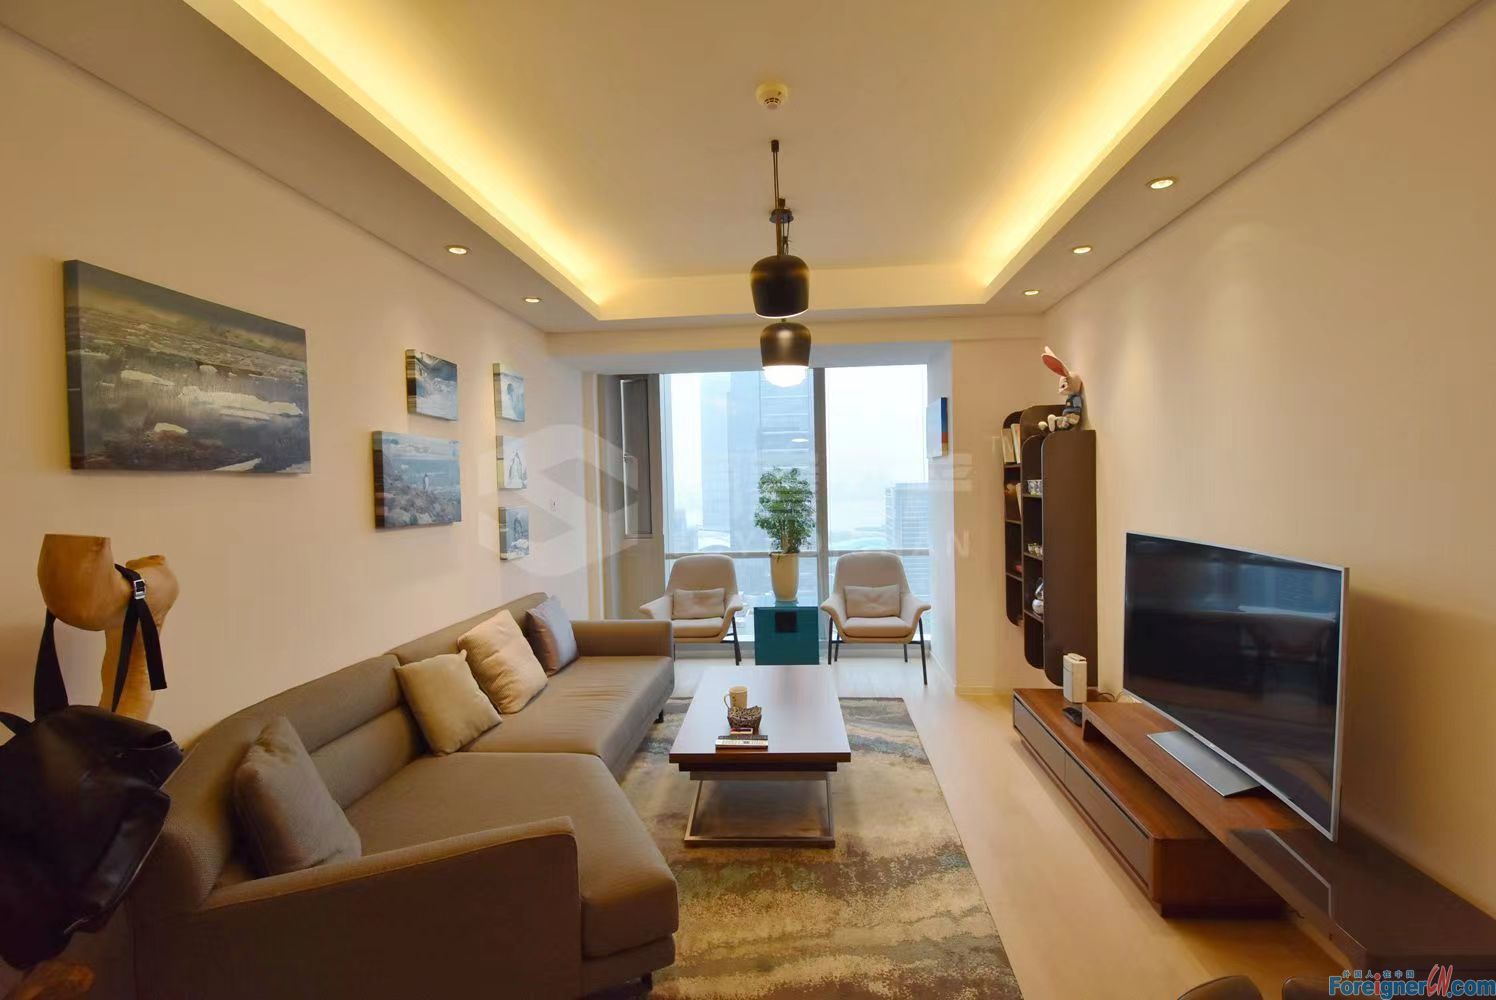 Luxurious！！！Apartment rent in Suzhou /1 study room and 1 bathroom/ modern and cozy livinng room/Xinghai square/Suzhou Center Shopping Center